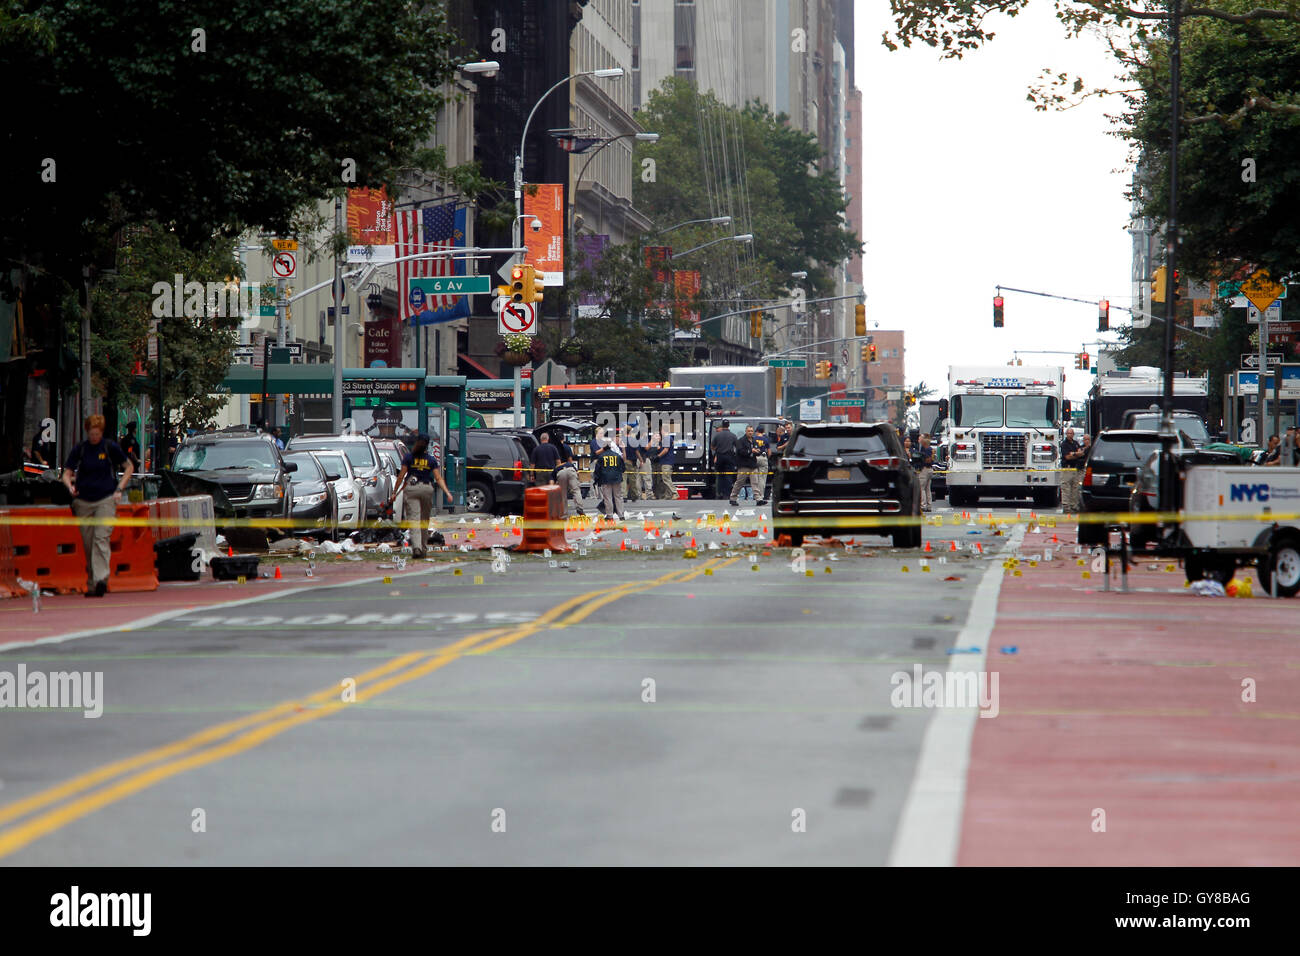 New York, USA. 18th Sep, 2016. Police, and law enforcement personnel from various agencies examine the area the morning after last night's explosion on New York's West 23rd Street between 6th and 7th Avenues in the Chelsea section of Manhattan.  the view is looking east on 23rd street from 7th Avenue towards 6th Avenue.  The area is marked for clues amidst the debris.  29 people were injured in the blast which has been described by officials as intentional. Credit:  Adam Stoltman/Alamy Live News Stock Photo